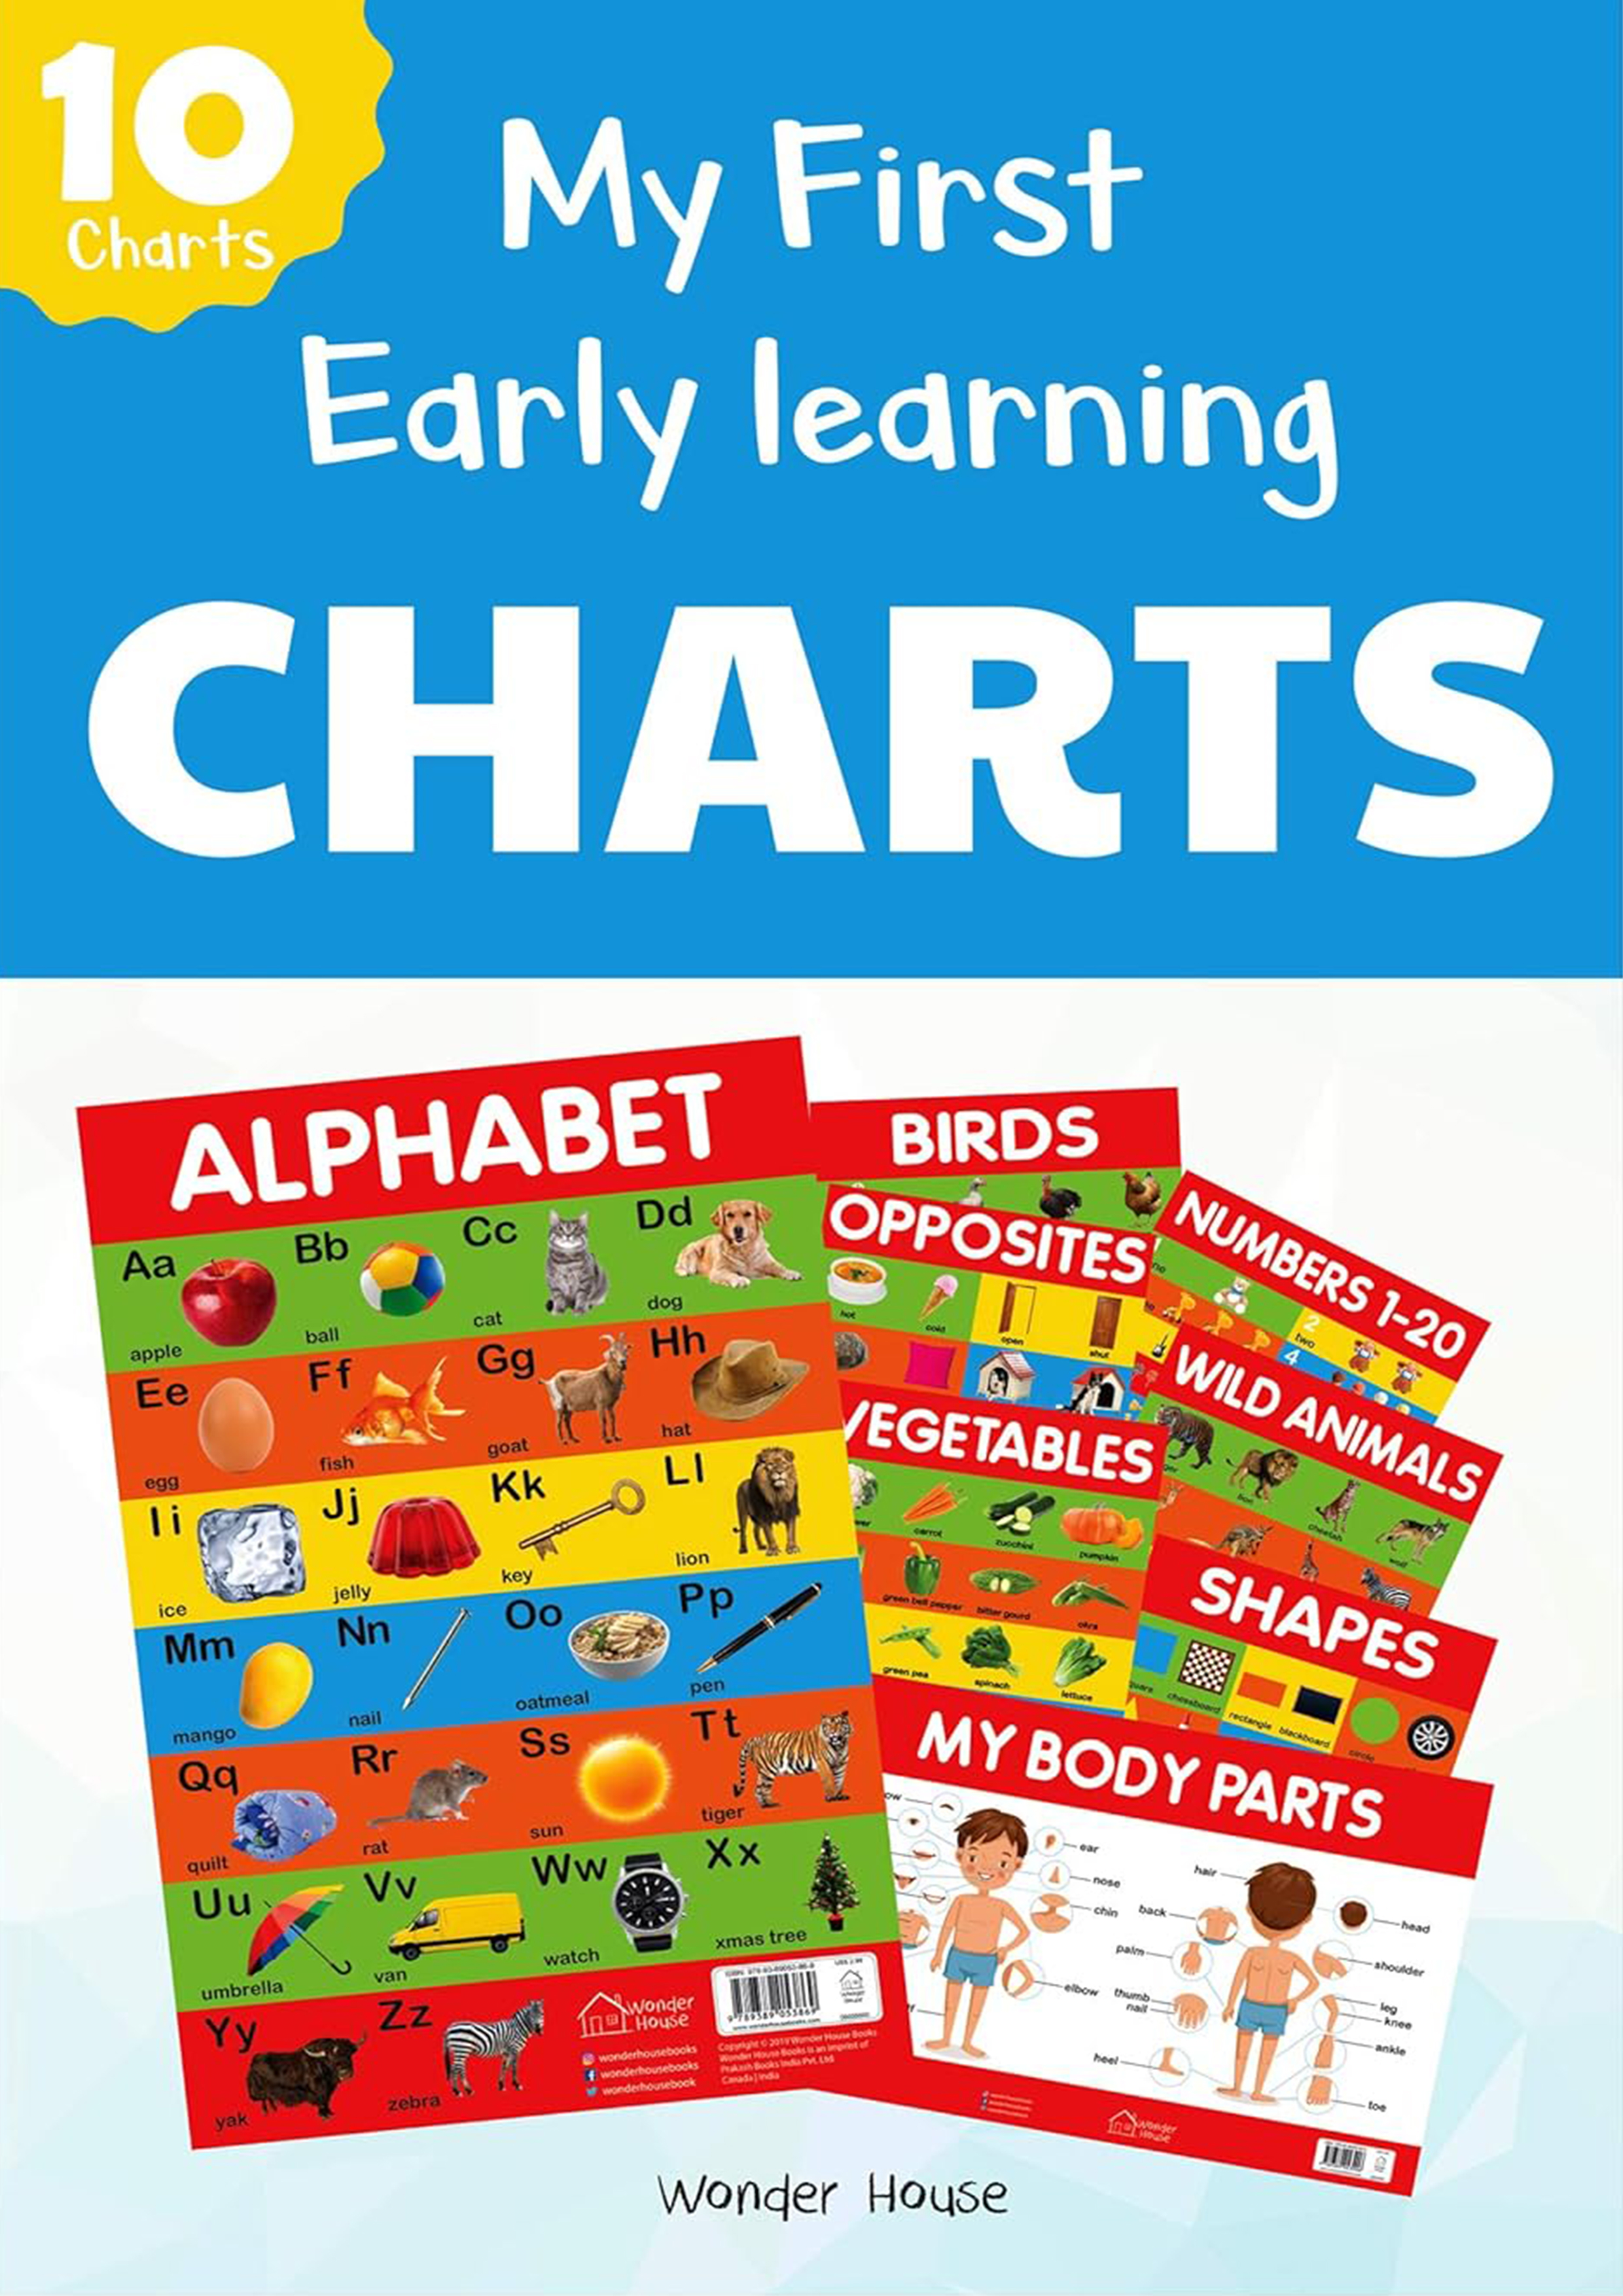 My First Early Learning Charts 10 Charts (পেপারব্যাক)